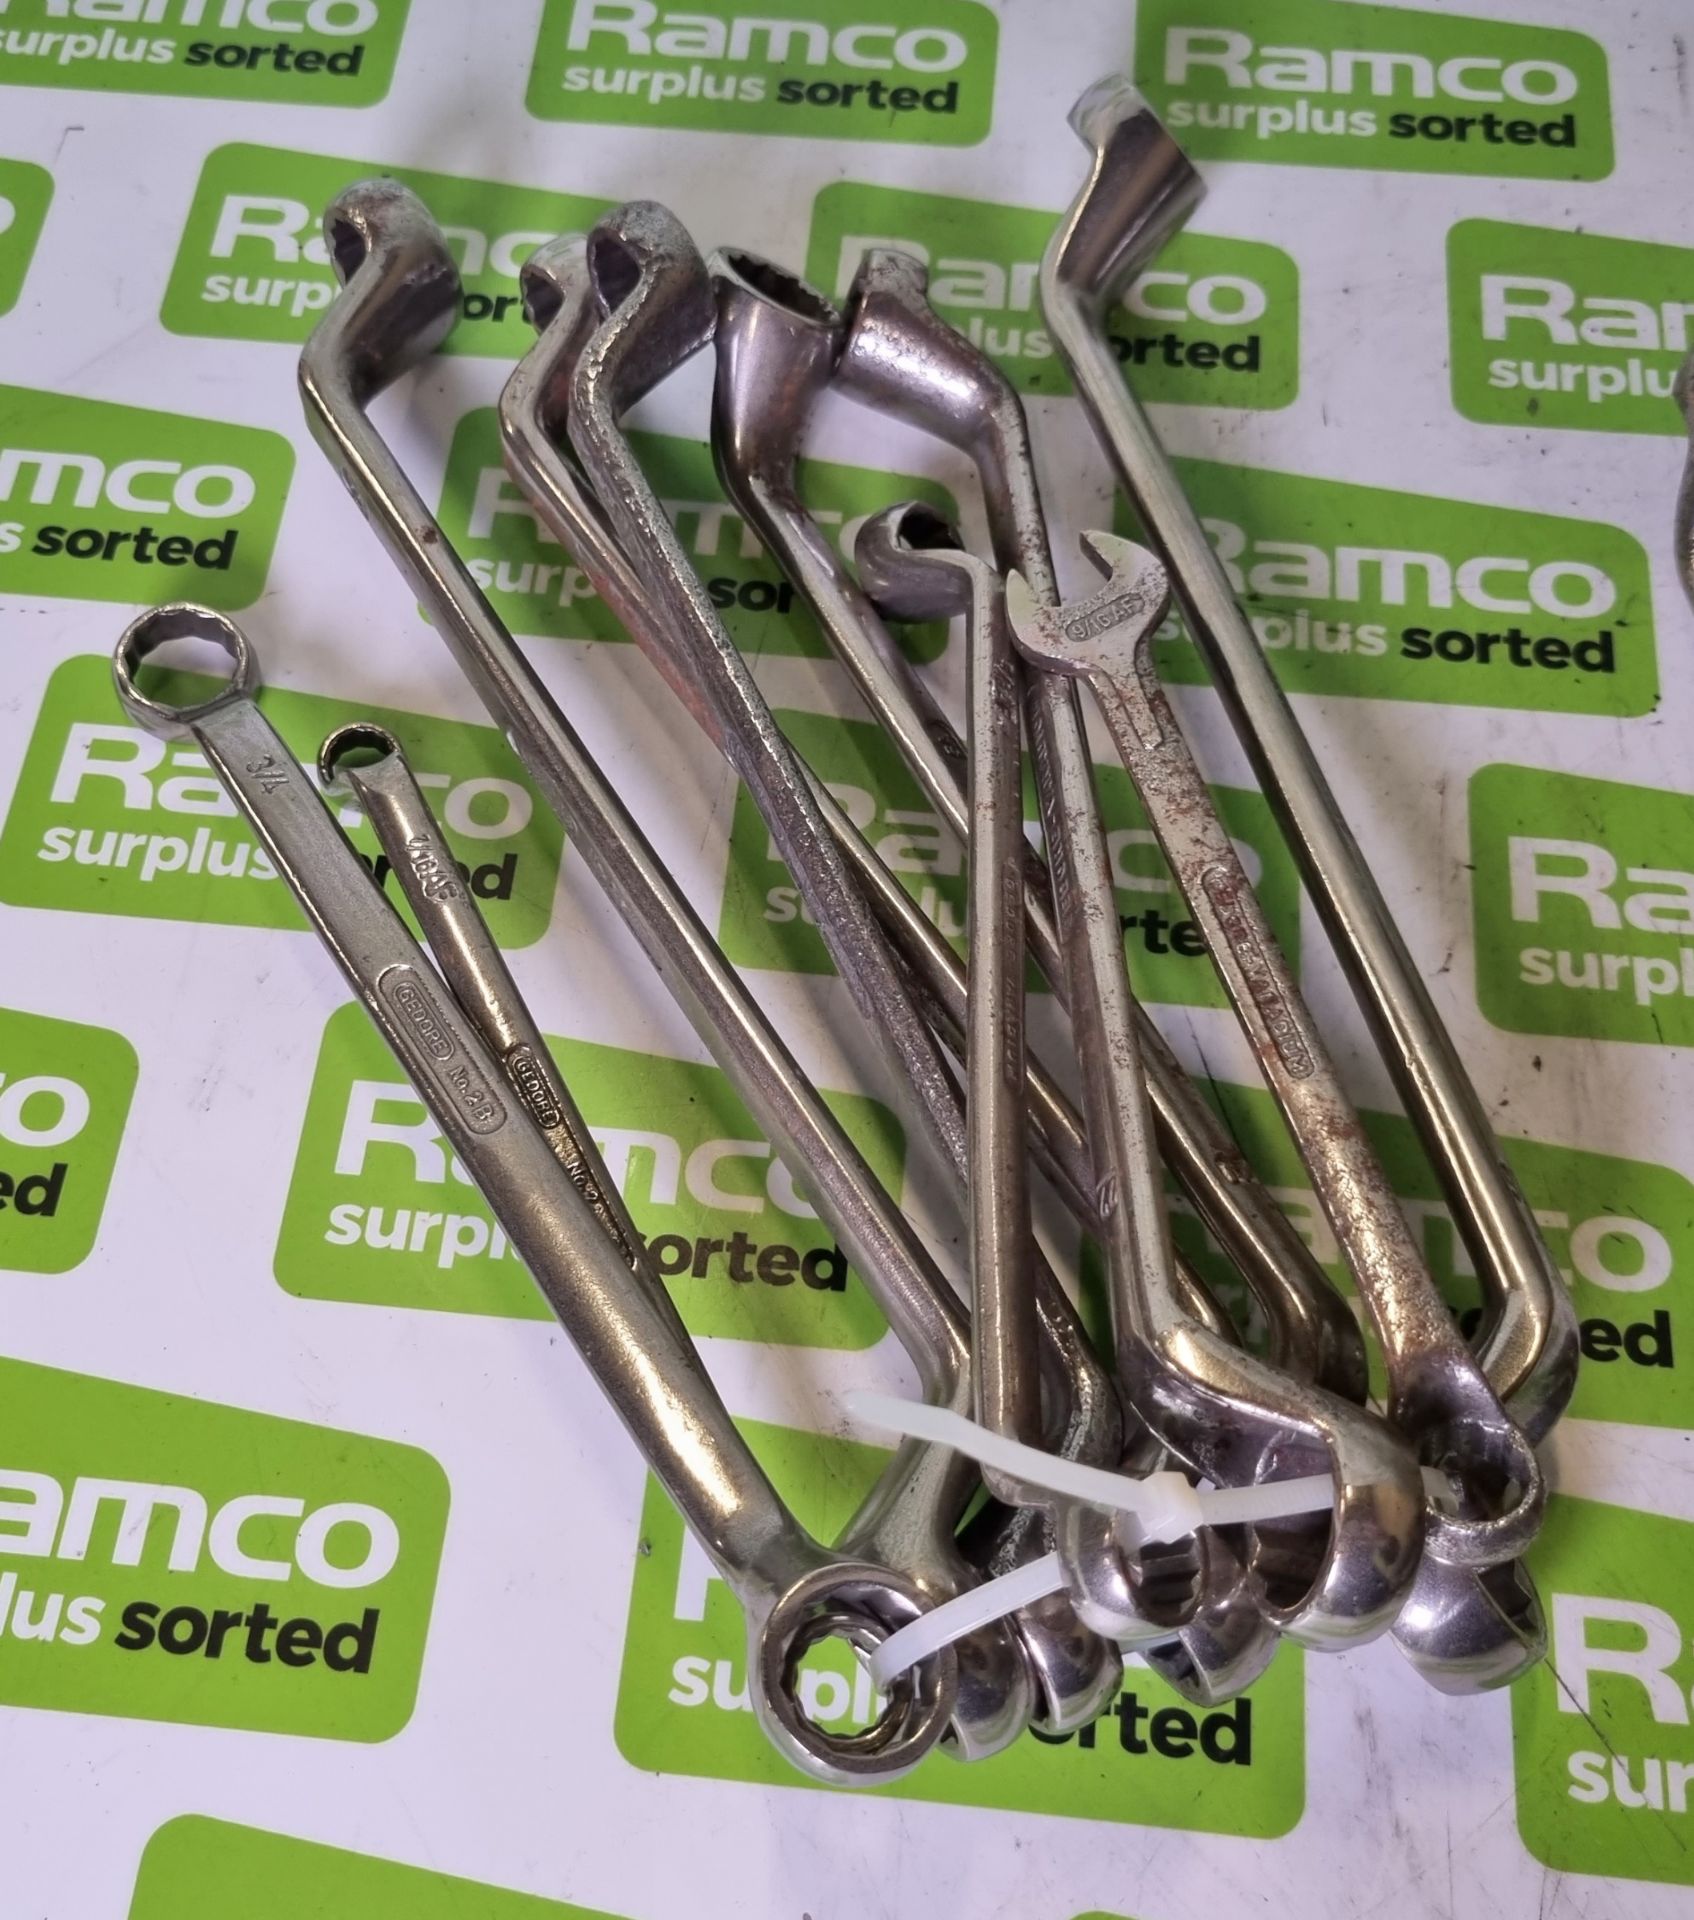 Double ended ring spanners - Image 4 of 4